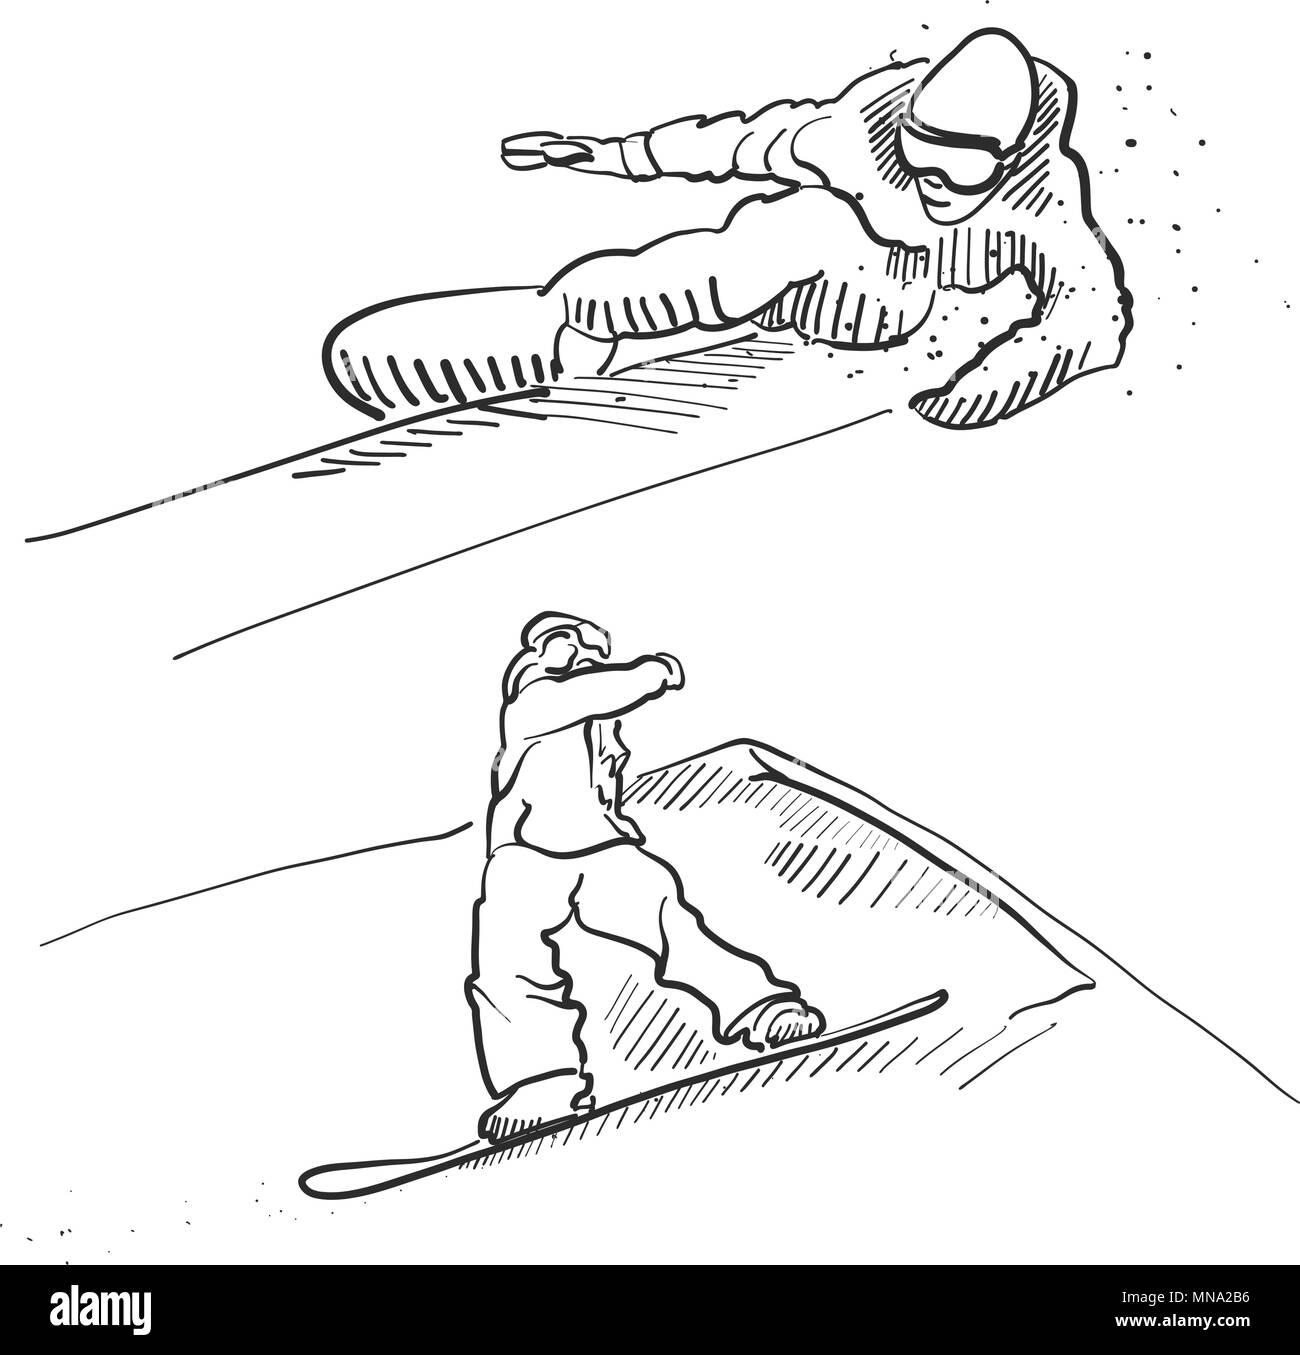 Two Snowboarder Jumping Situation Sketches, Hand drawn Vector Outline Artwork Stock Vector